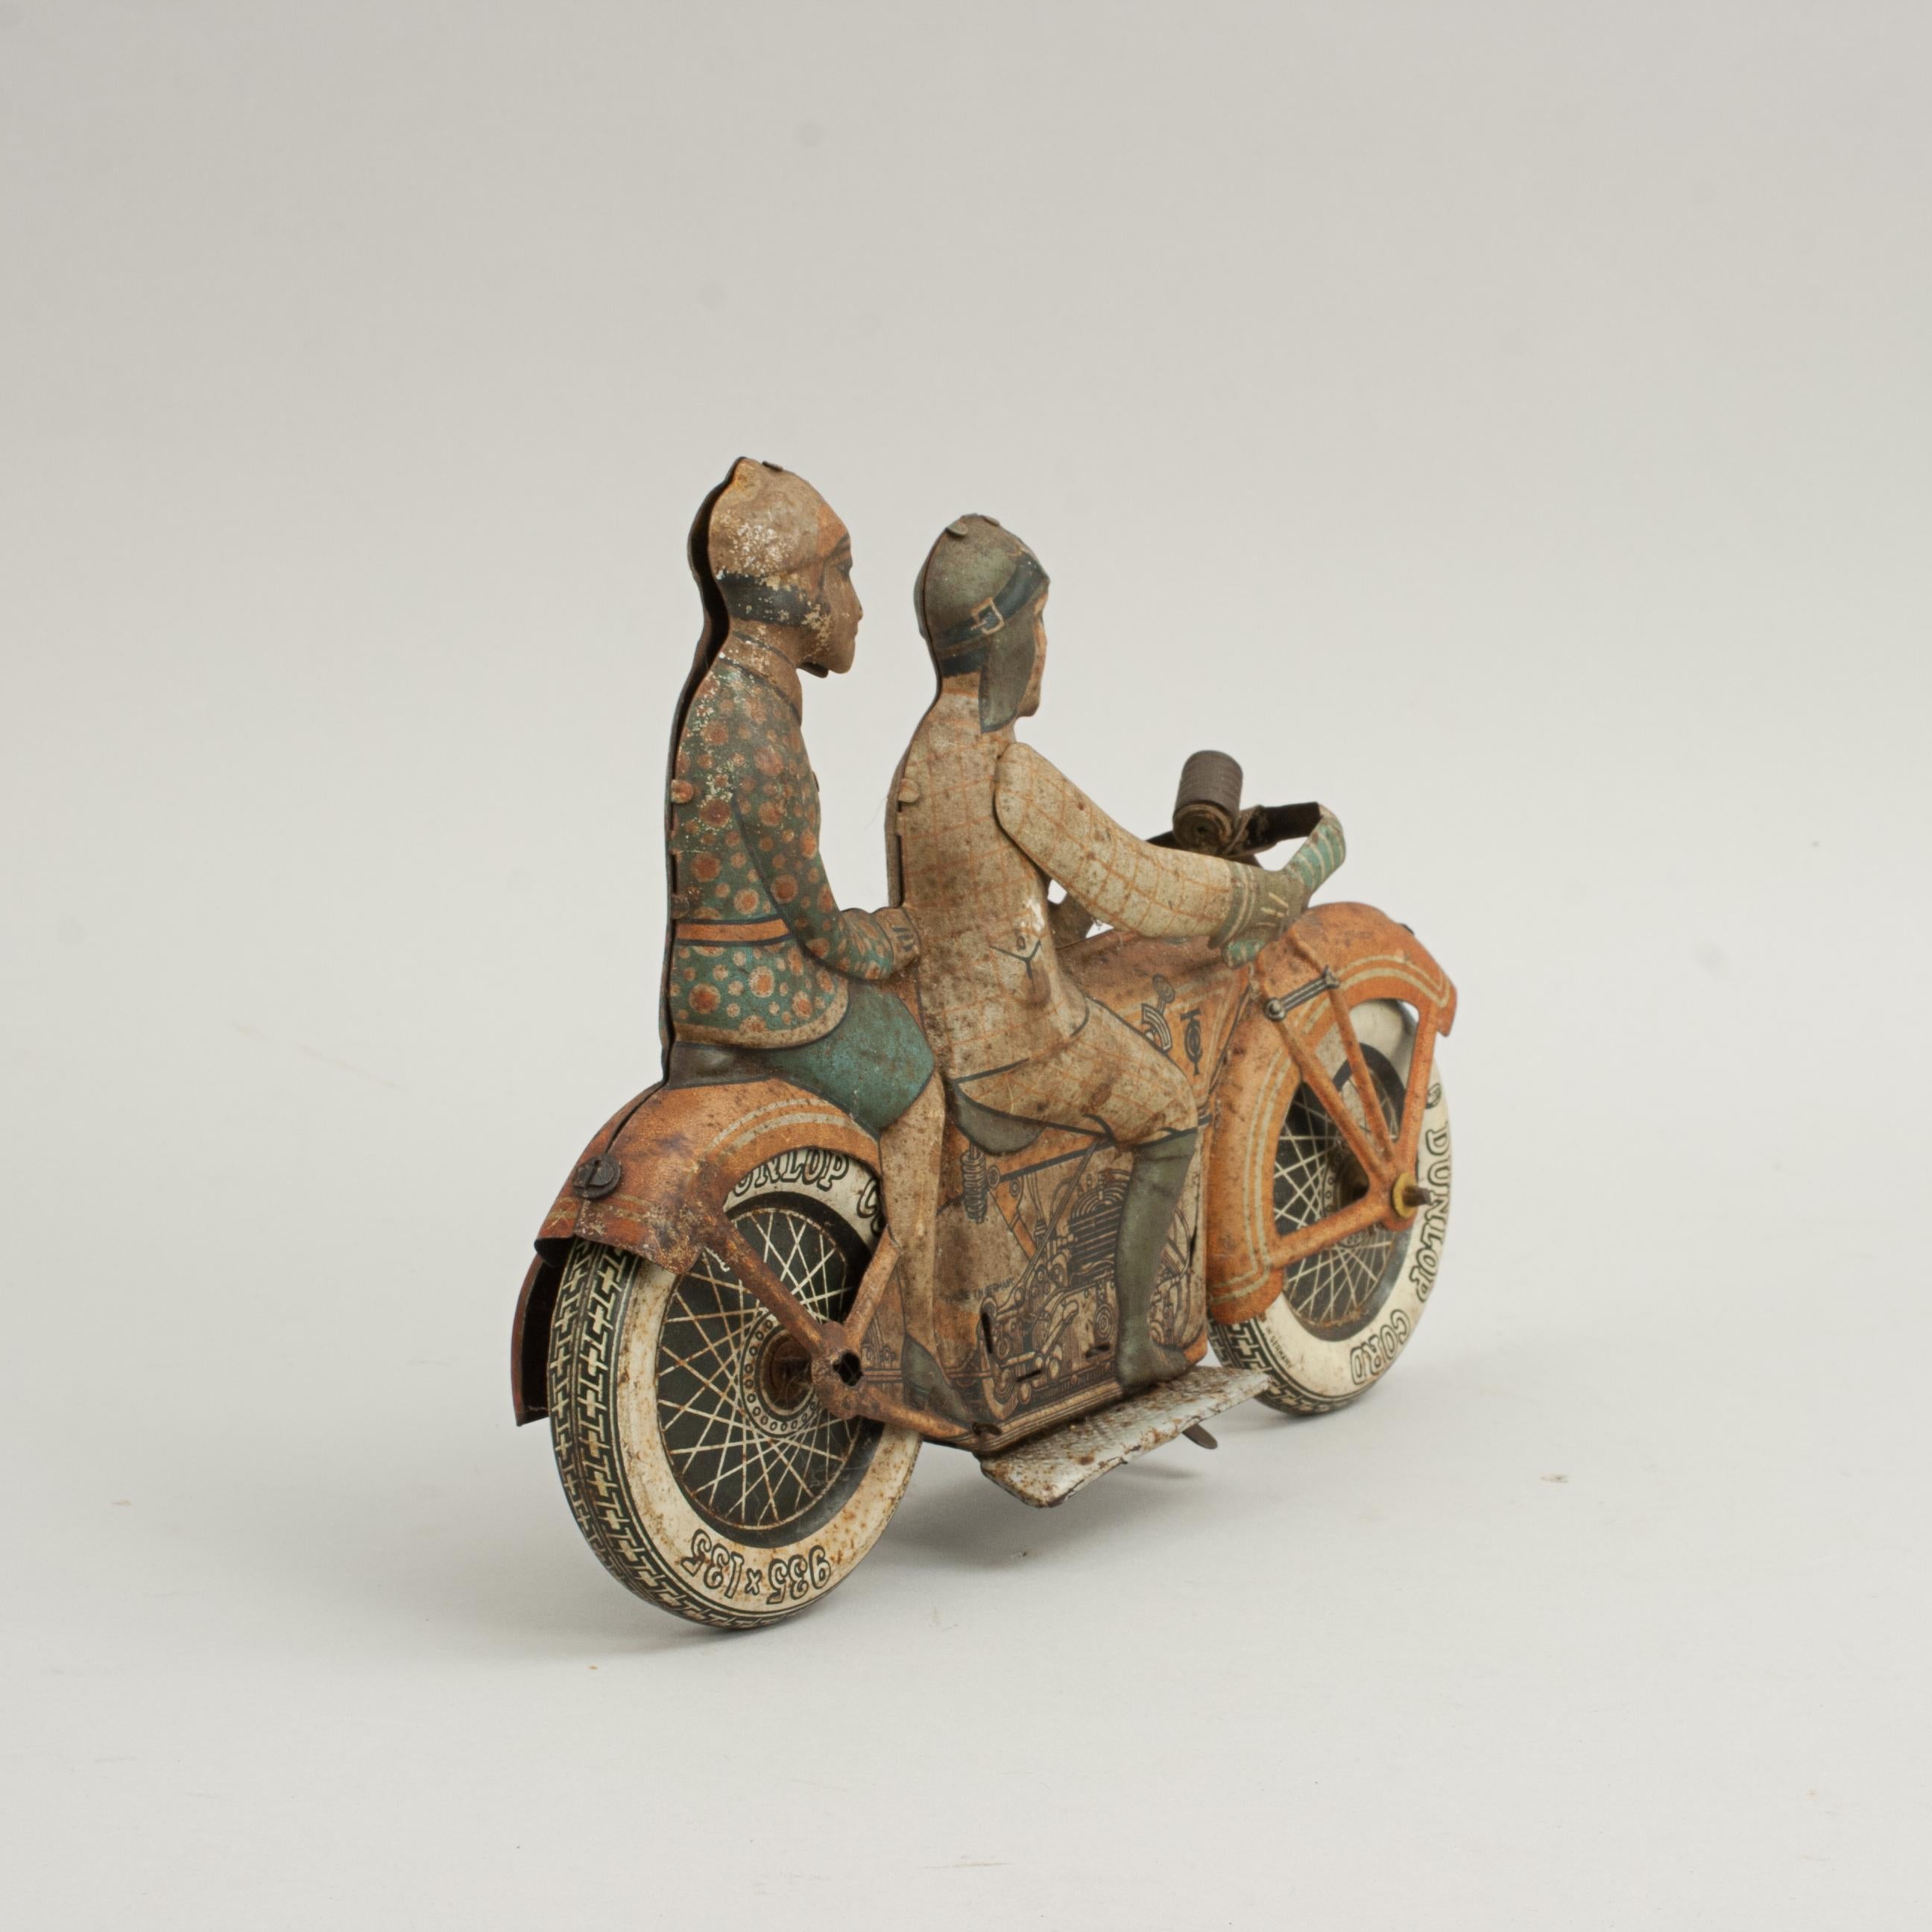 Tipp & Co. Toy Clockwork Tinplate Motorcycle.
A rare, desirable, tinplate wind-up motorcycle by the renowned German manufacturer, Tipp & Co or TippCo. The original tin windup motorbike with a civilian male rider and female pillion passenger. The